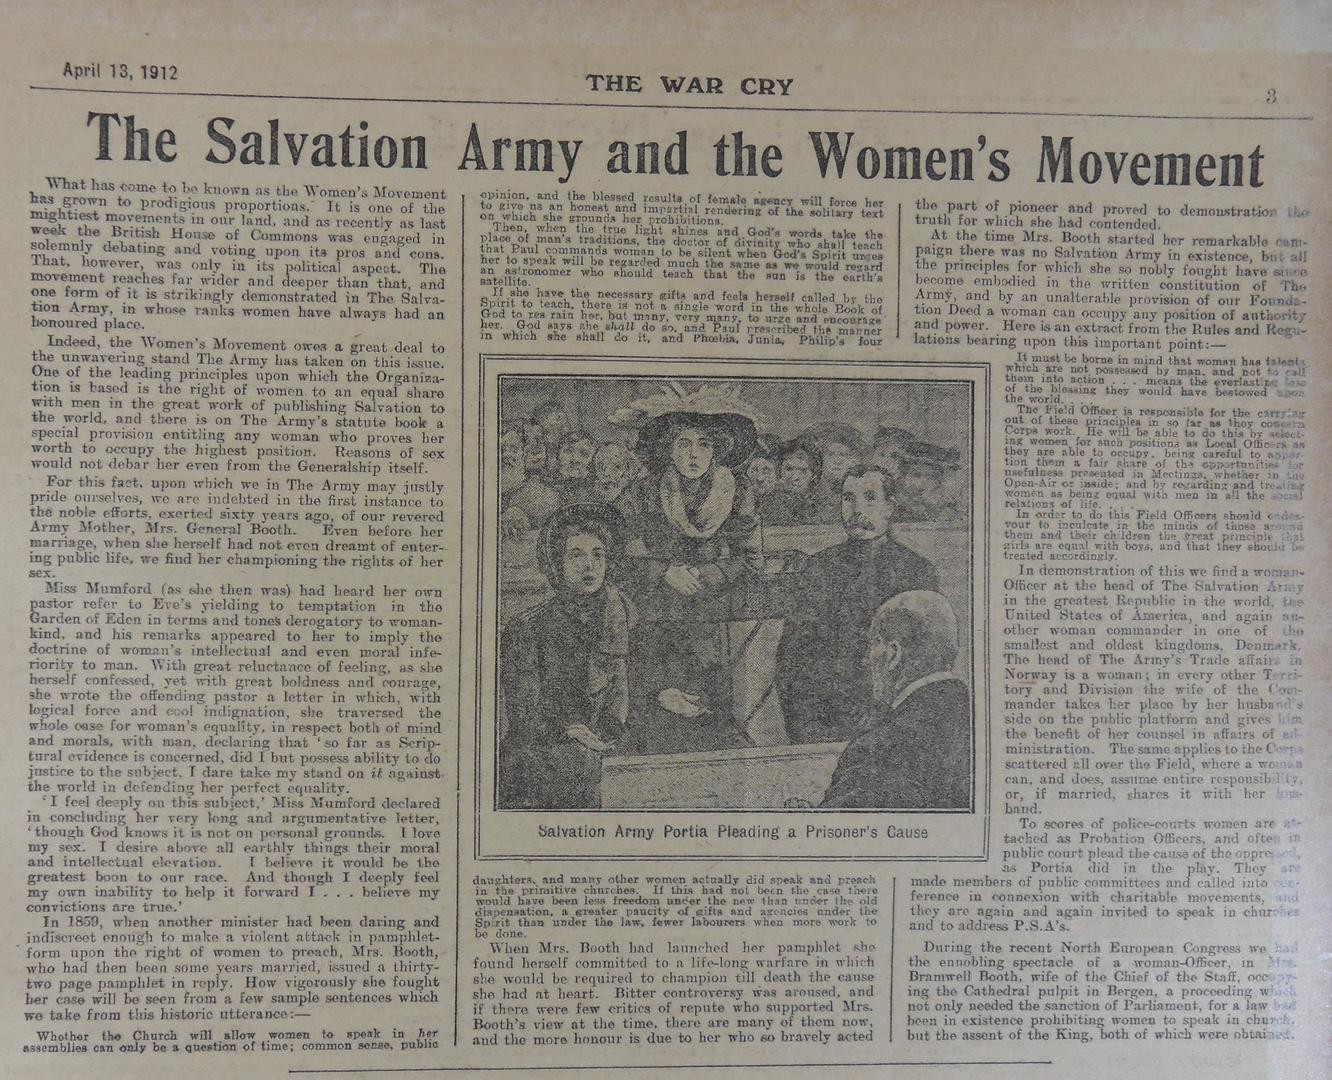 The Salvation Army and the Women’s Movement’, The War Cry, 13 April 1912